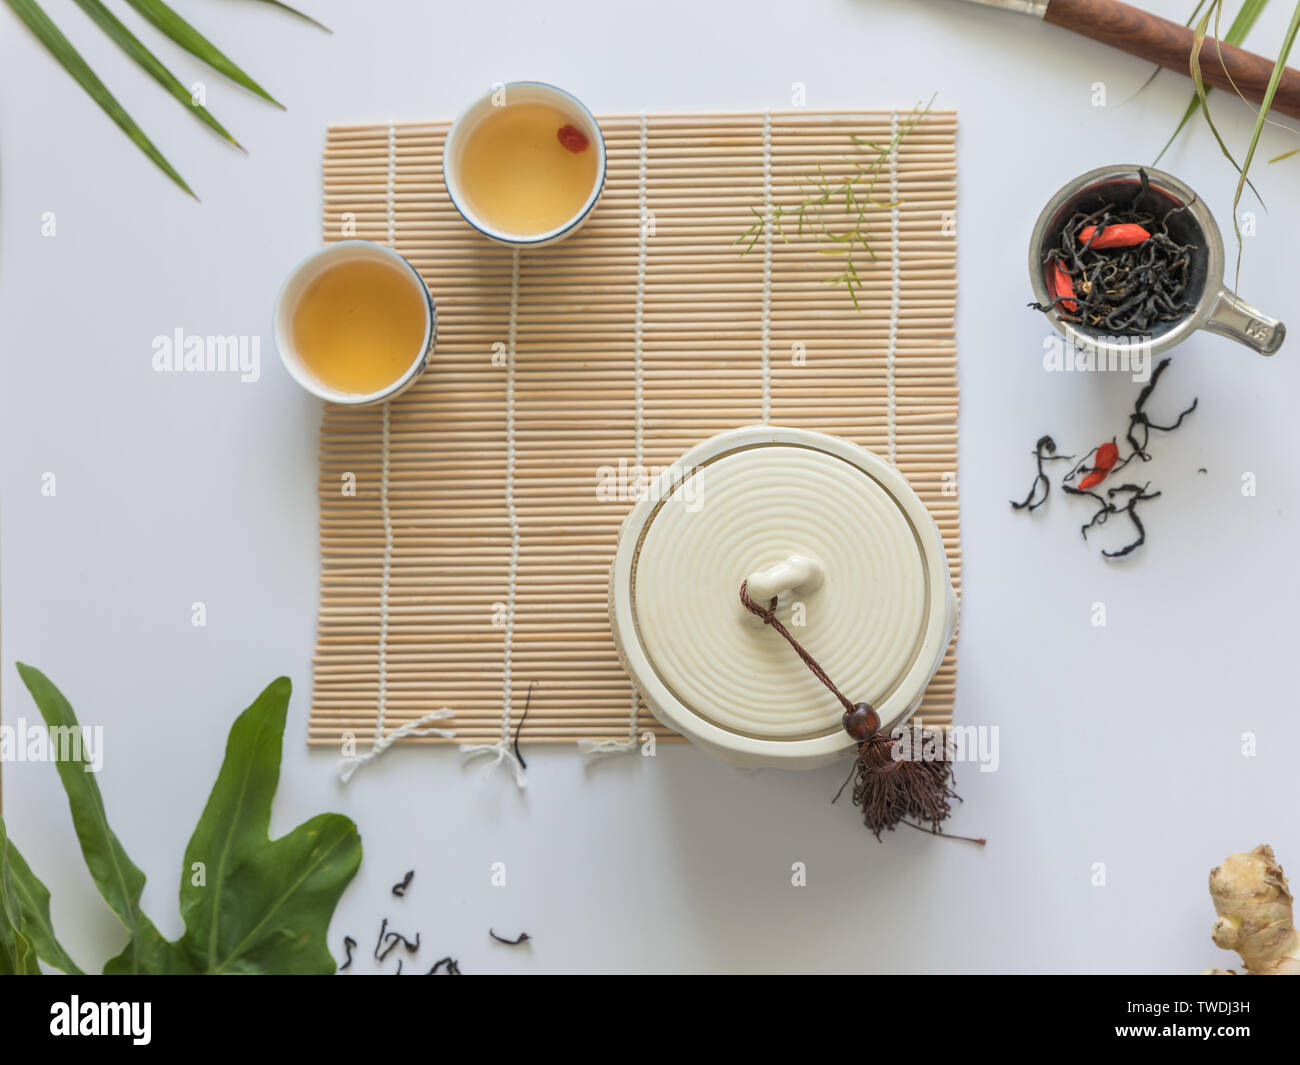 On the bamboo curtain is a white teahouse and two cups of tea. Stock Photo